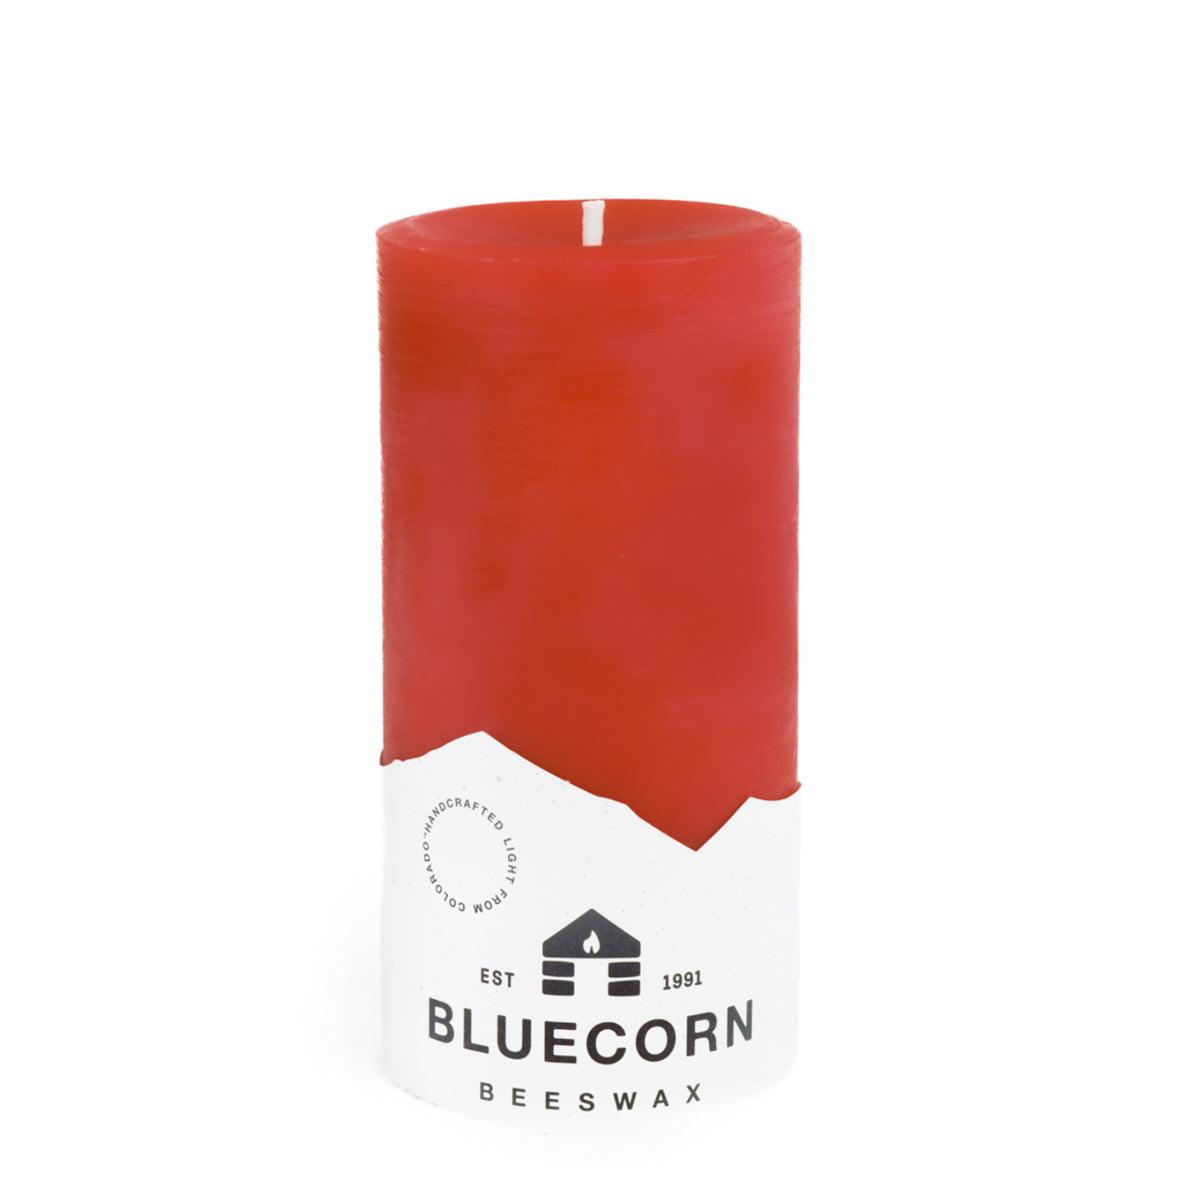 Bluecorn Beeswax 100% Pure Beeswax 3" x 6" Colored Pillar Candle. Burn Time: 90 hours. Made with 100% Pure Beeswax, wax is red in color. Made with 100% pure cotton wick, no lead and paraffin free. Clean burning and non-toxic. Features Bluecorn Beeswax label printed on 100% recycled paper. Clearance items might have an odd blemish or air bubble, but will still burn beautifully. 